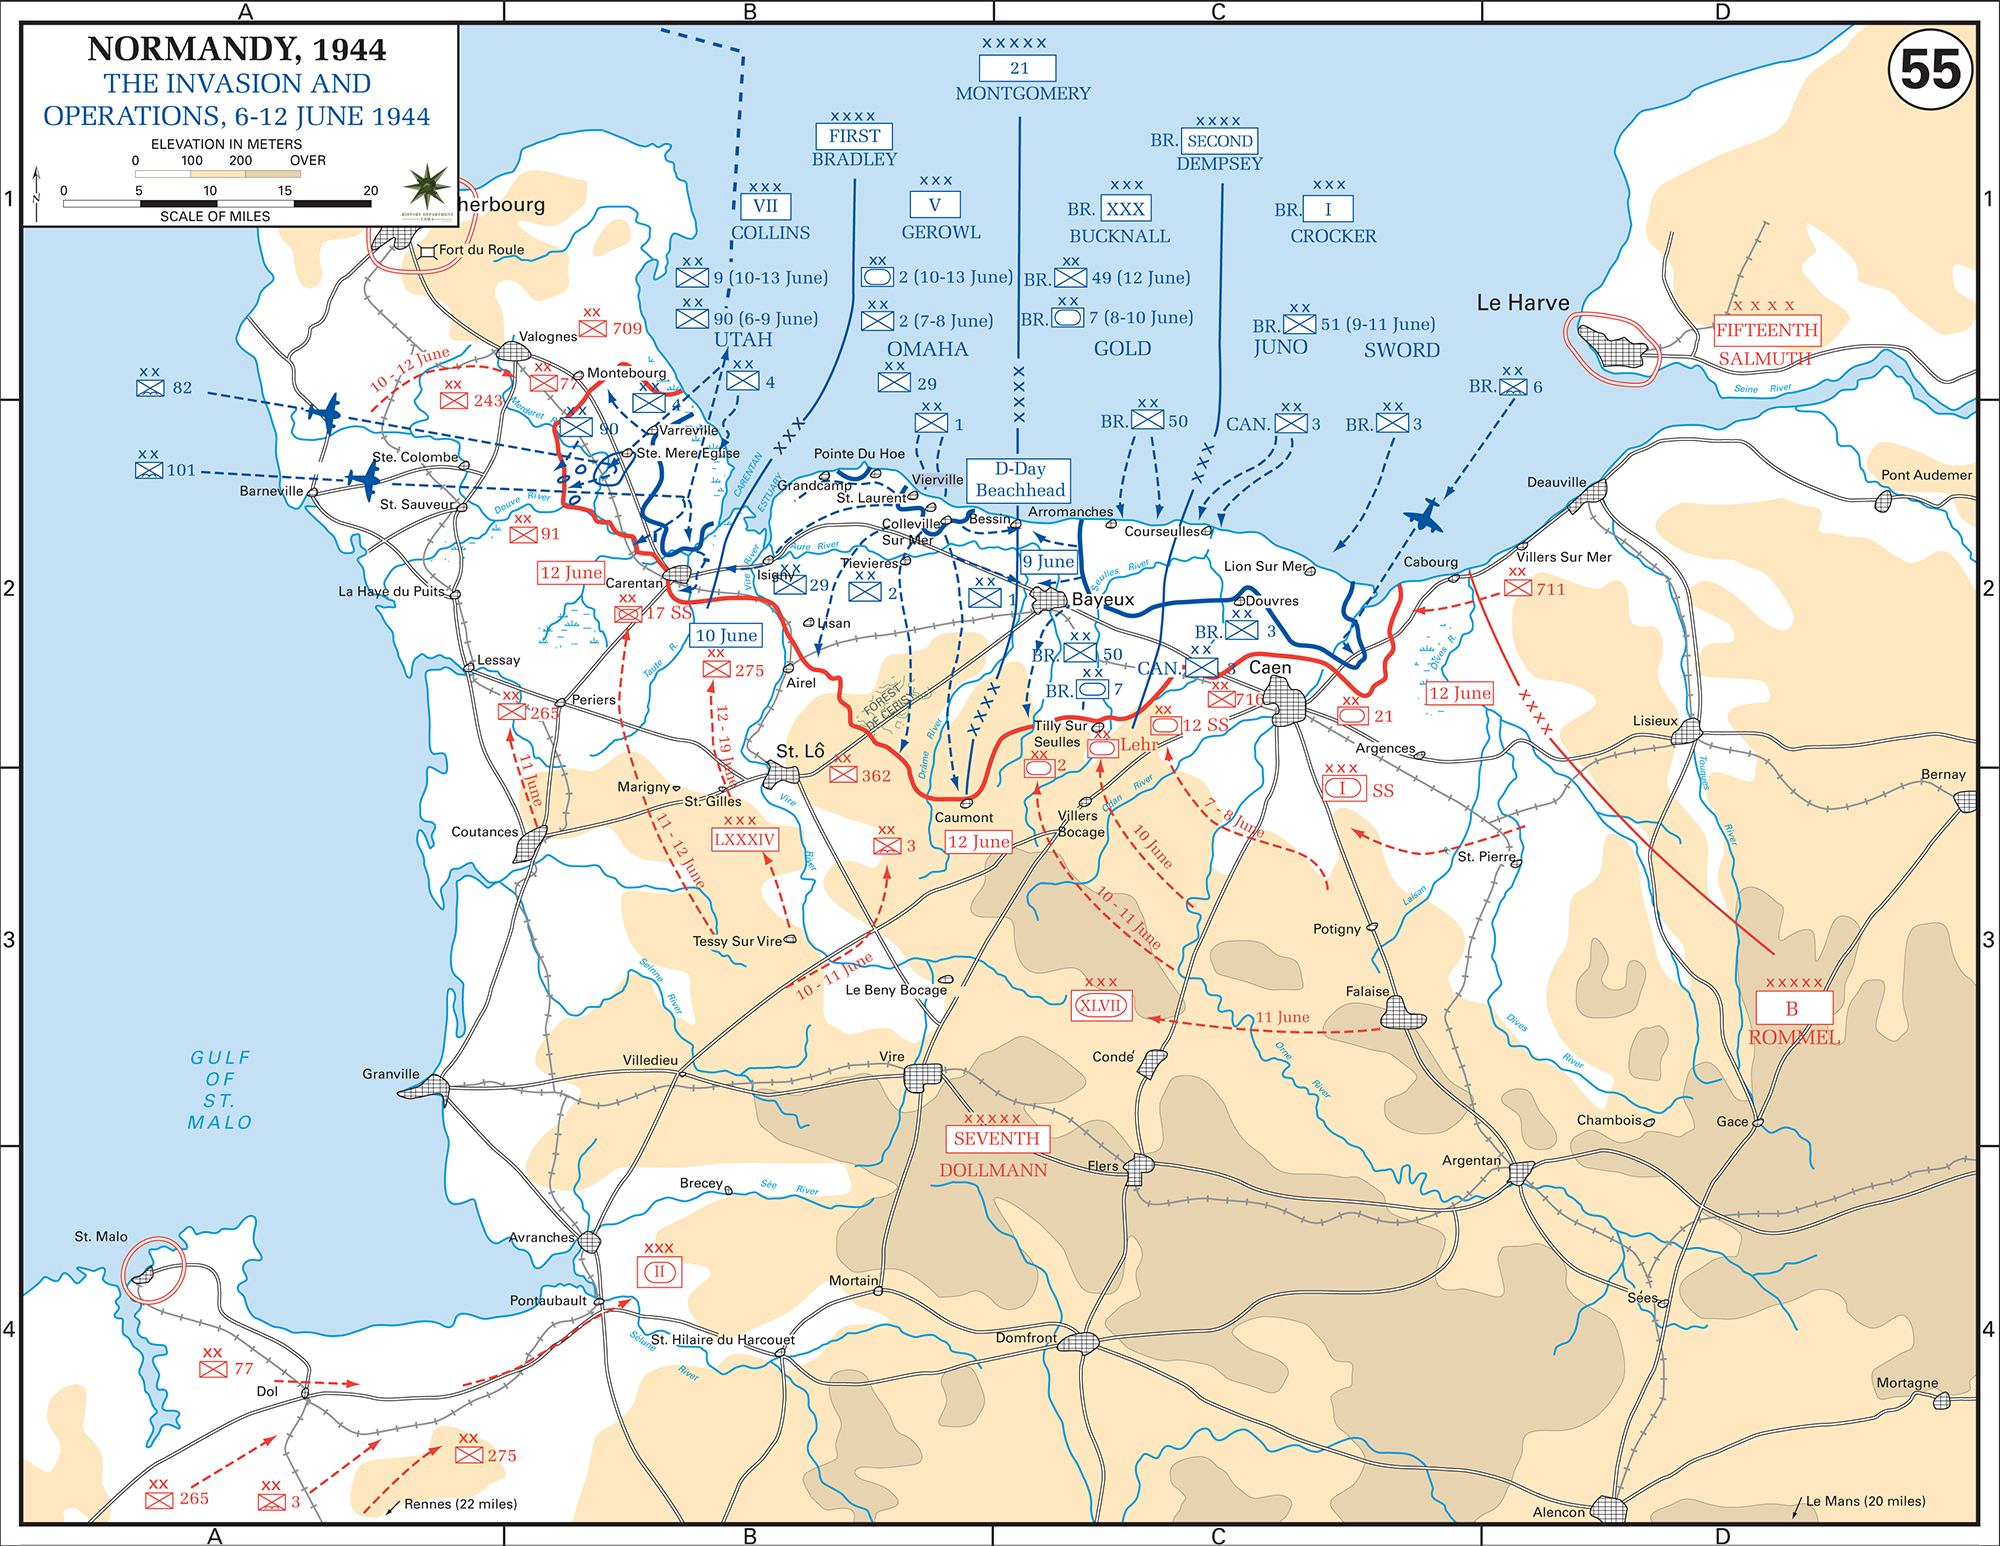 Map of WWII: Normandy Invasion June 6-12, 1944